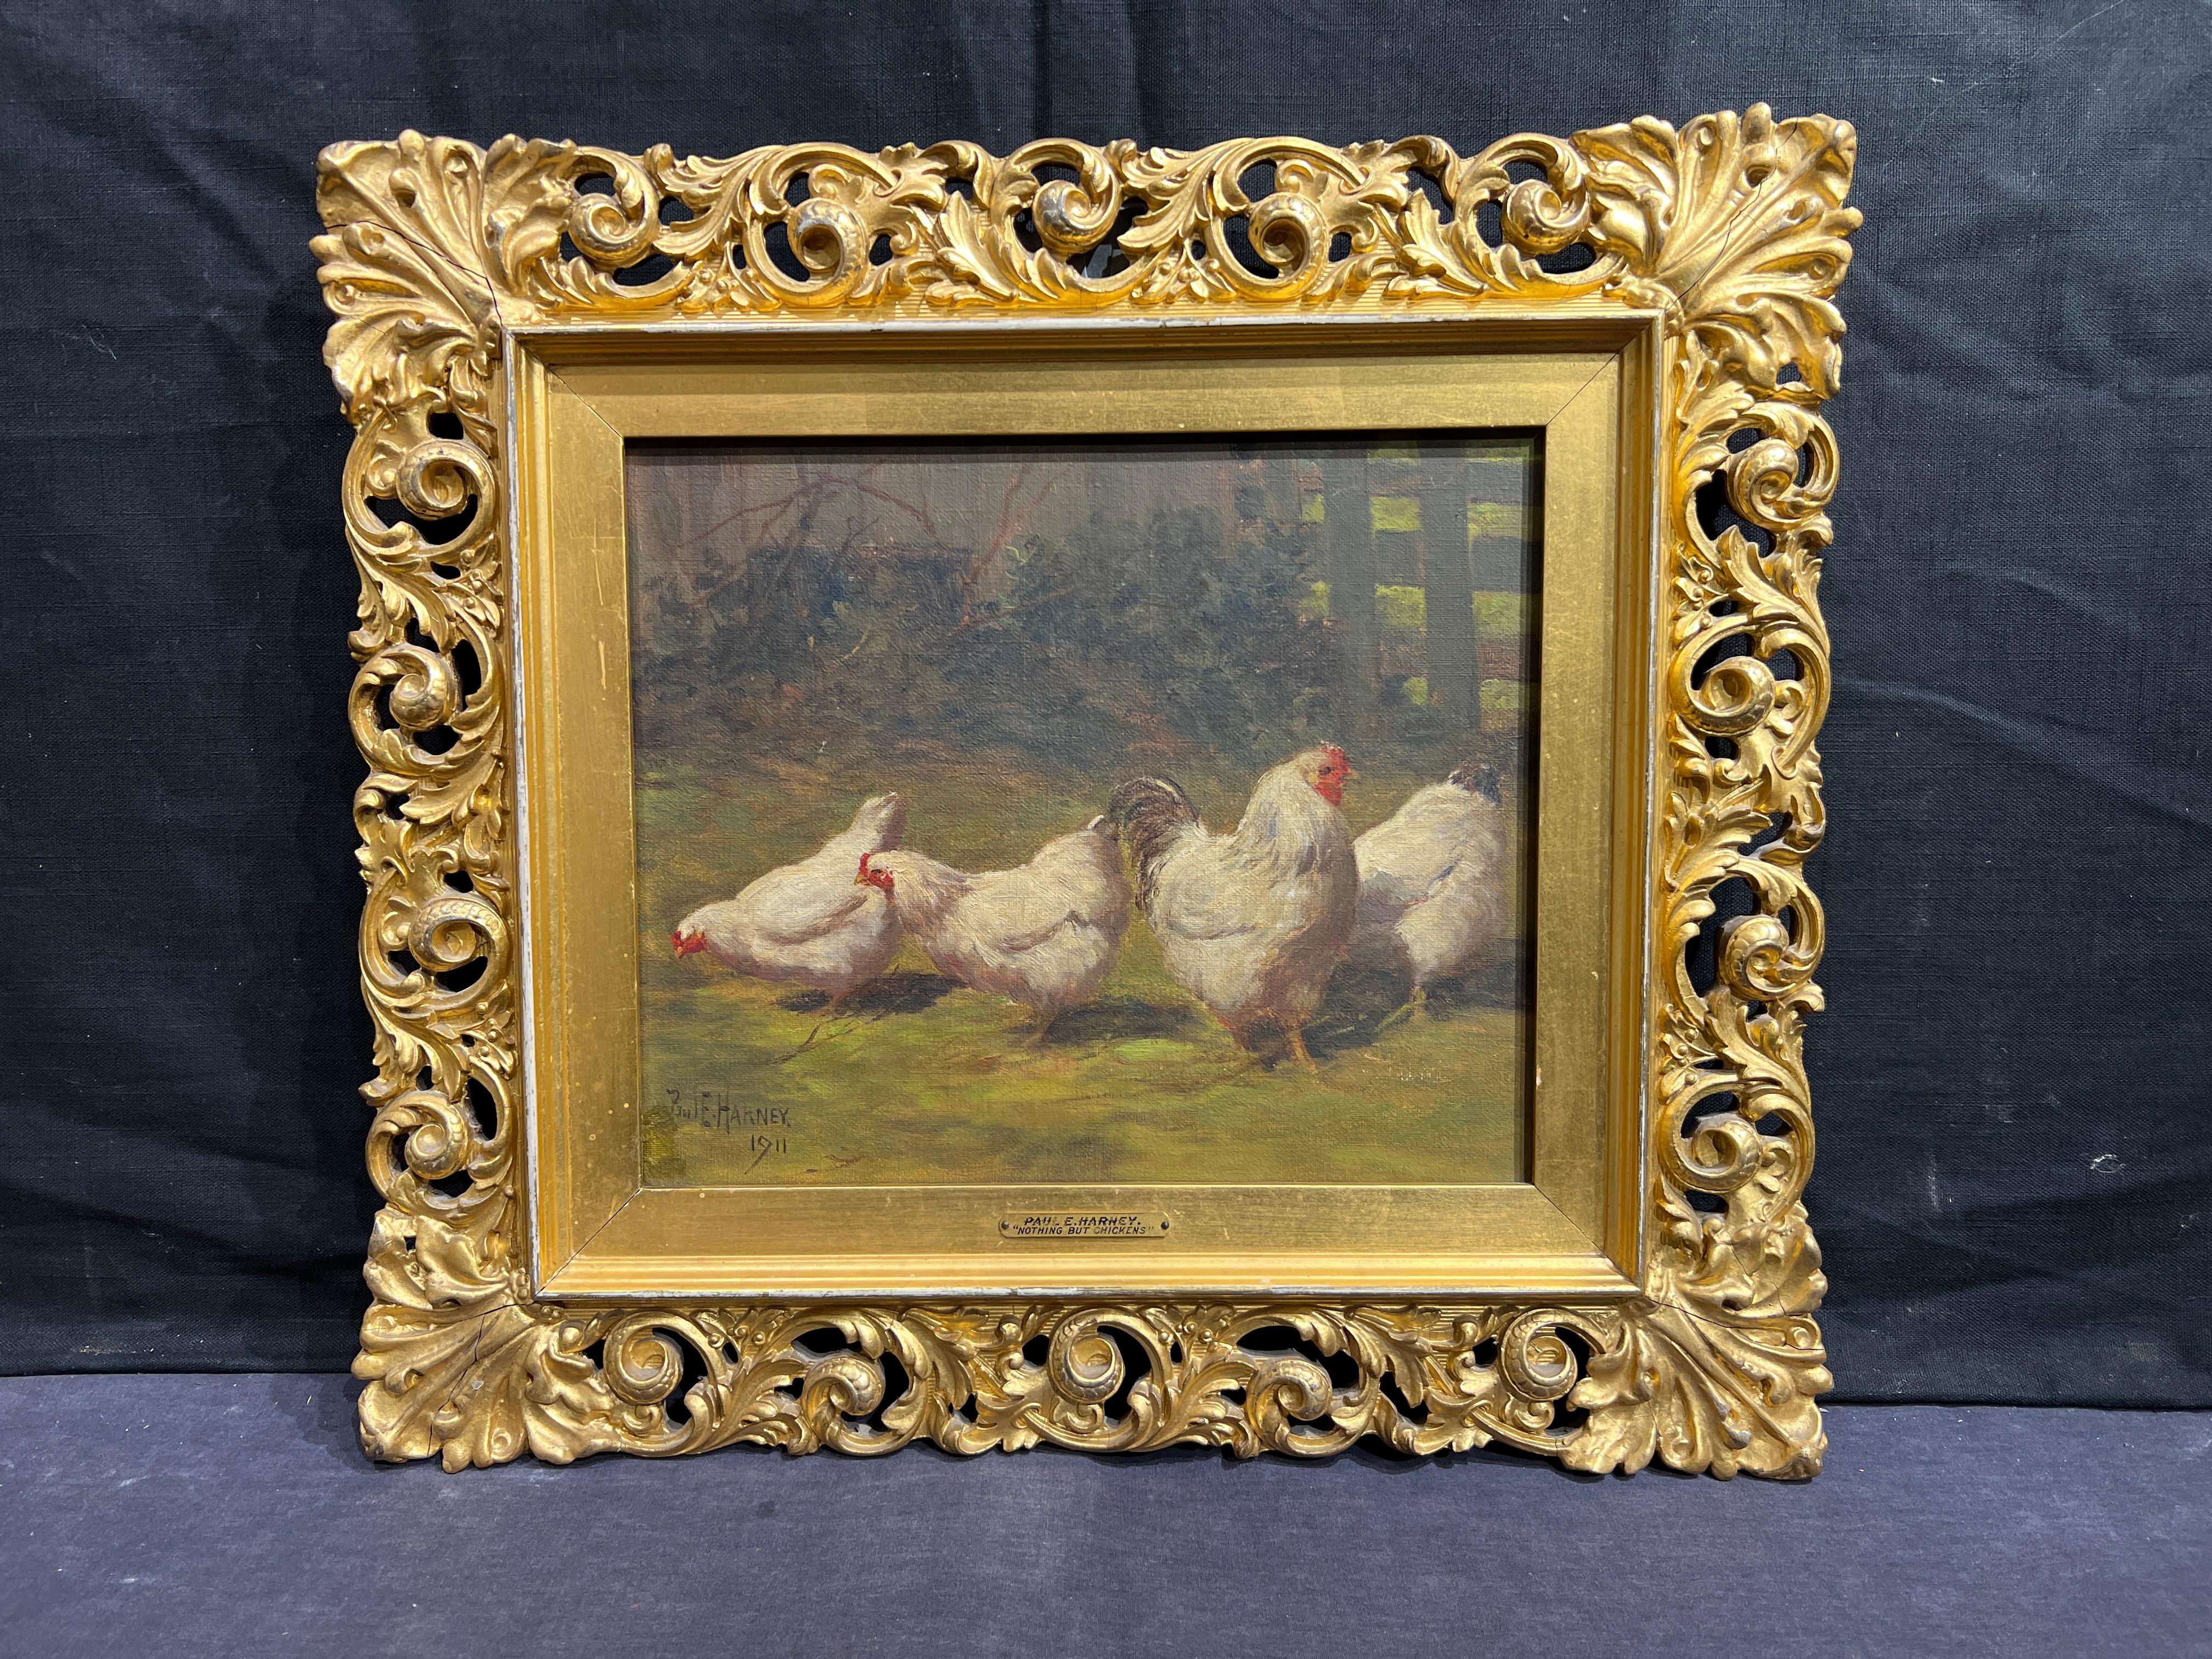 Four White Chickens - Painting by Paul E. Harney Jr.